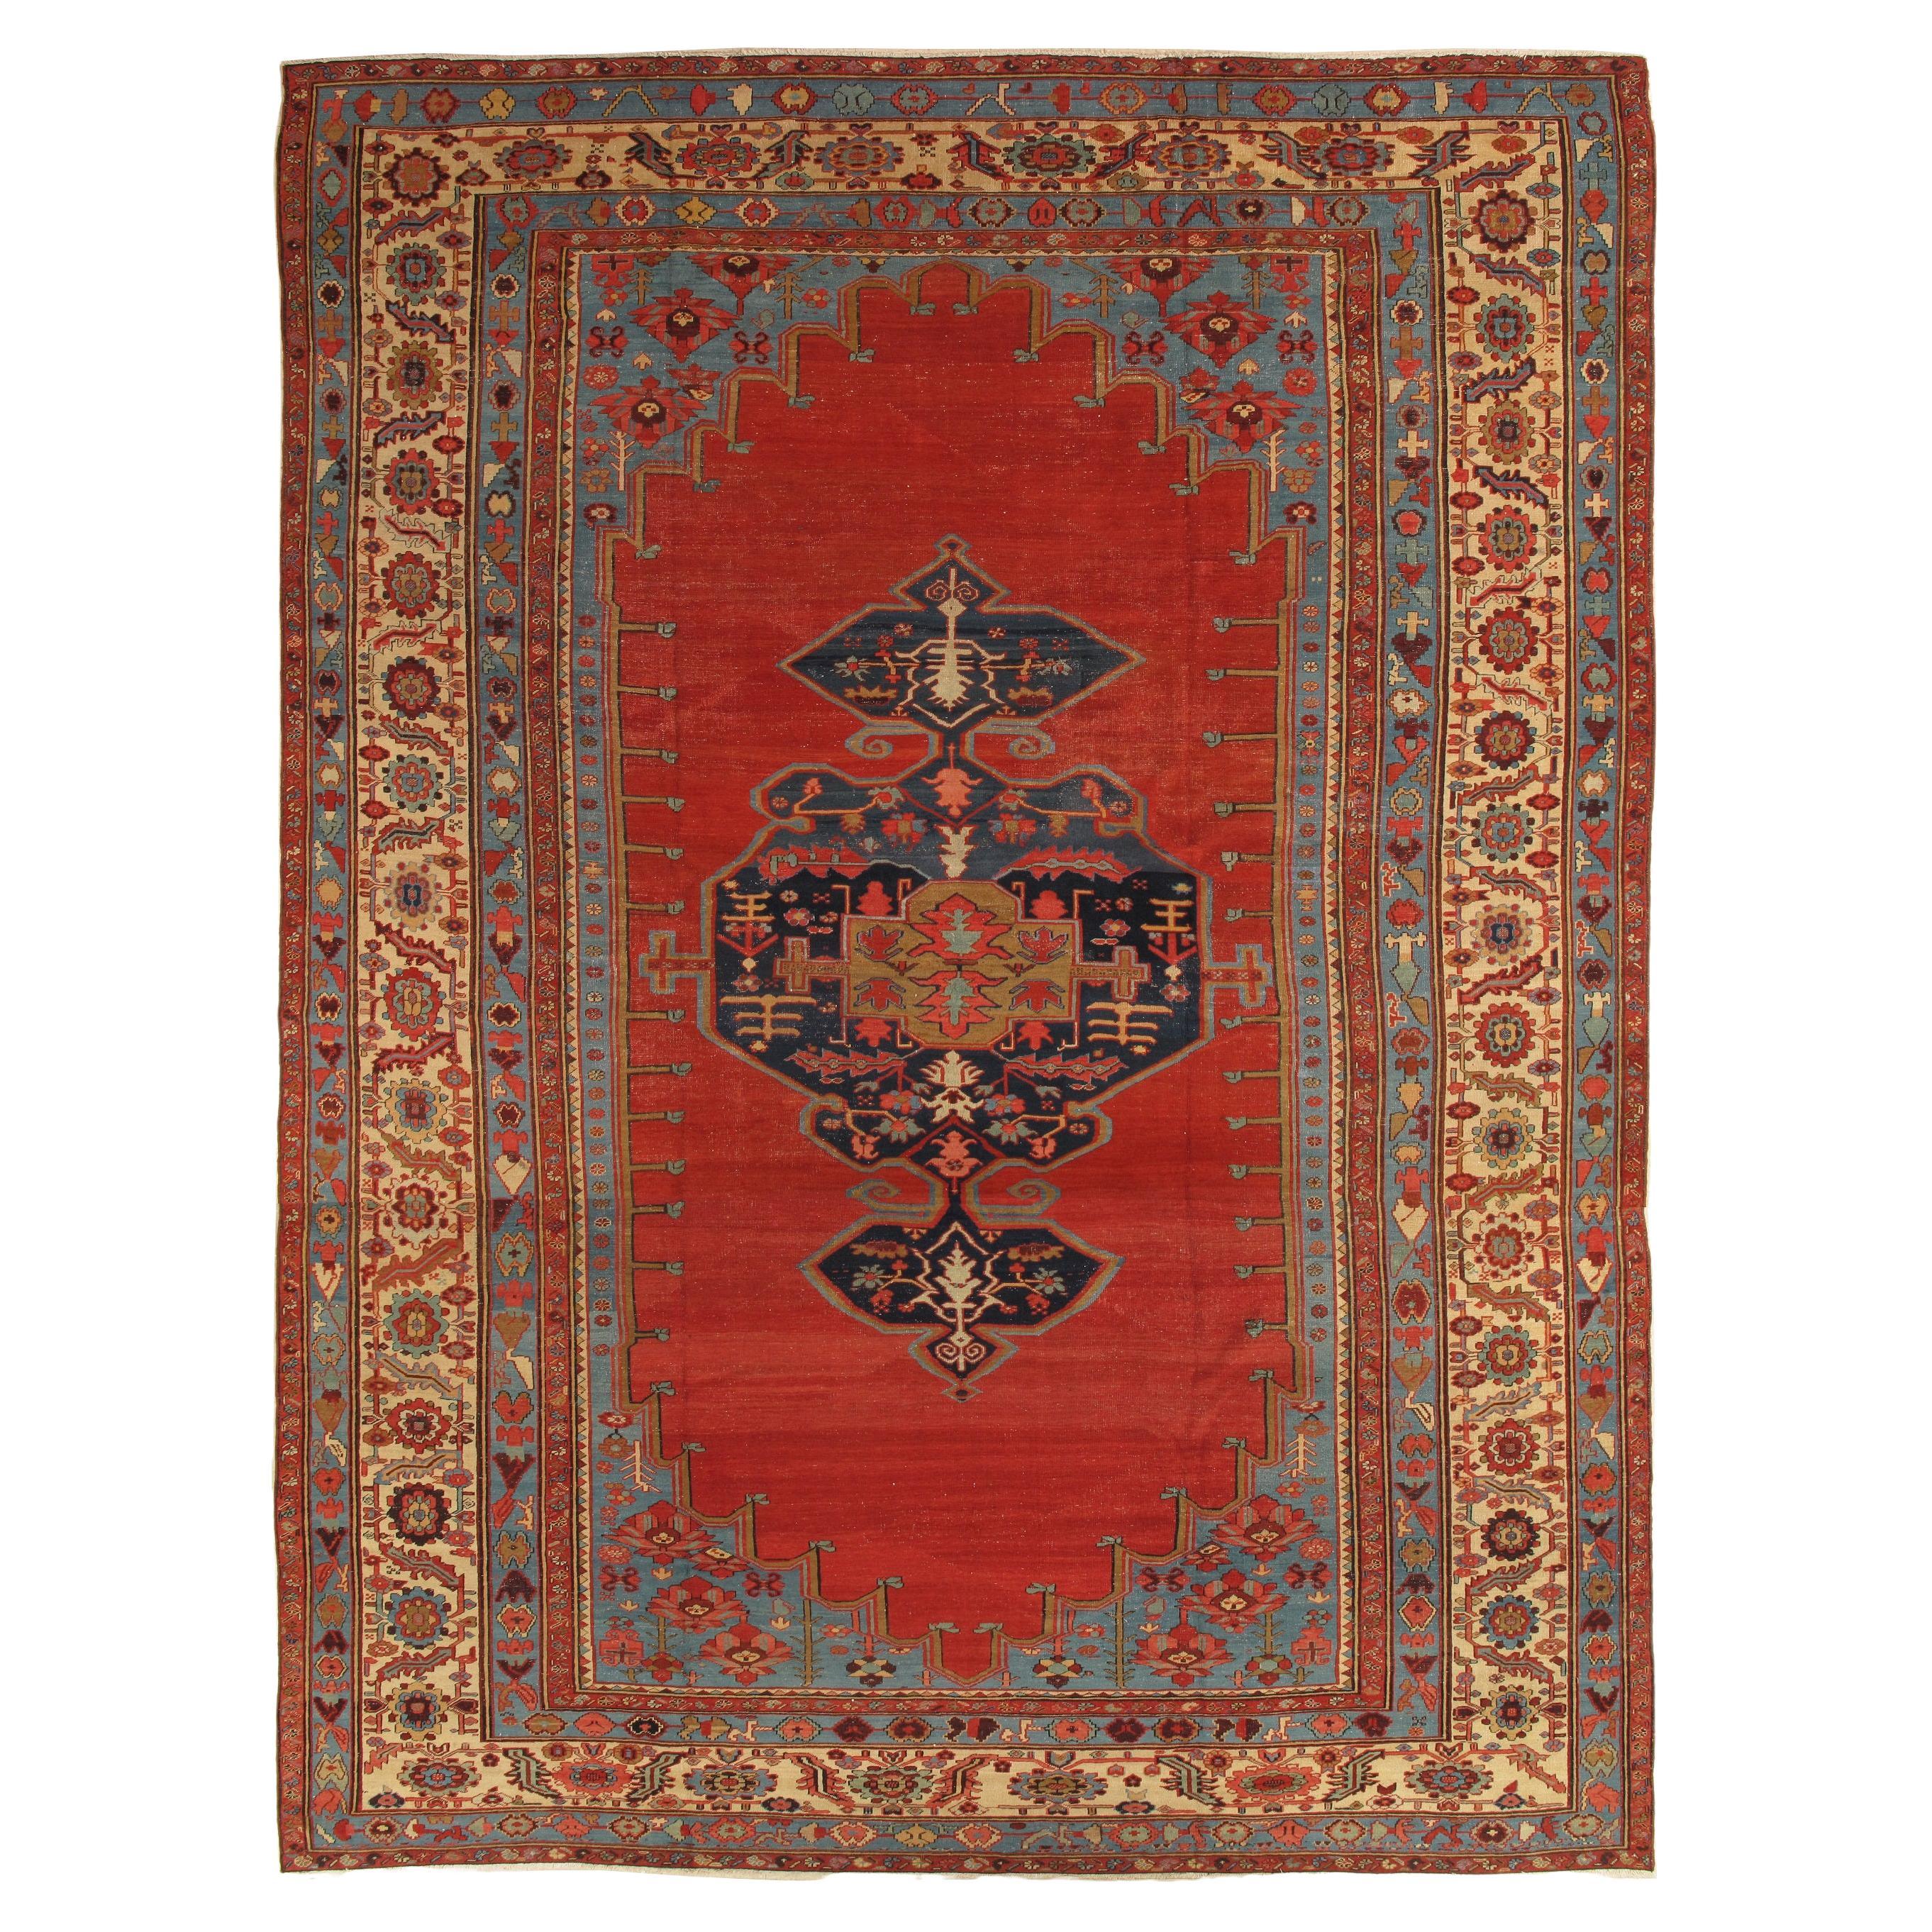 Antique Bakshaish Carpet, Oriental Persian Handmade in Ivory, Blue and Red For Sale